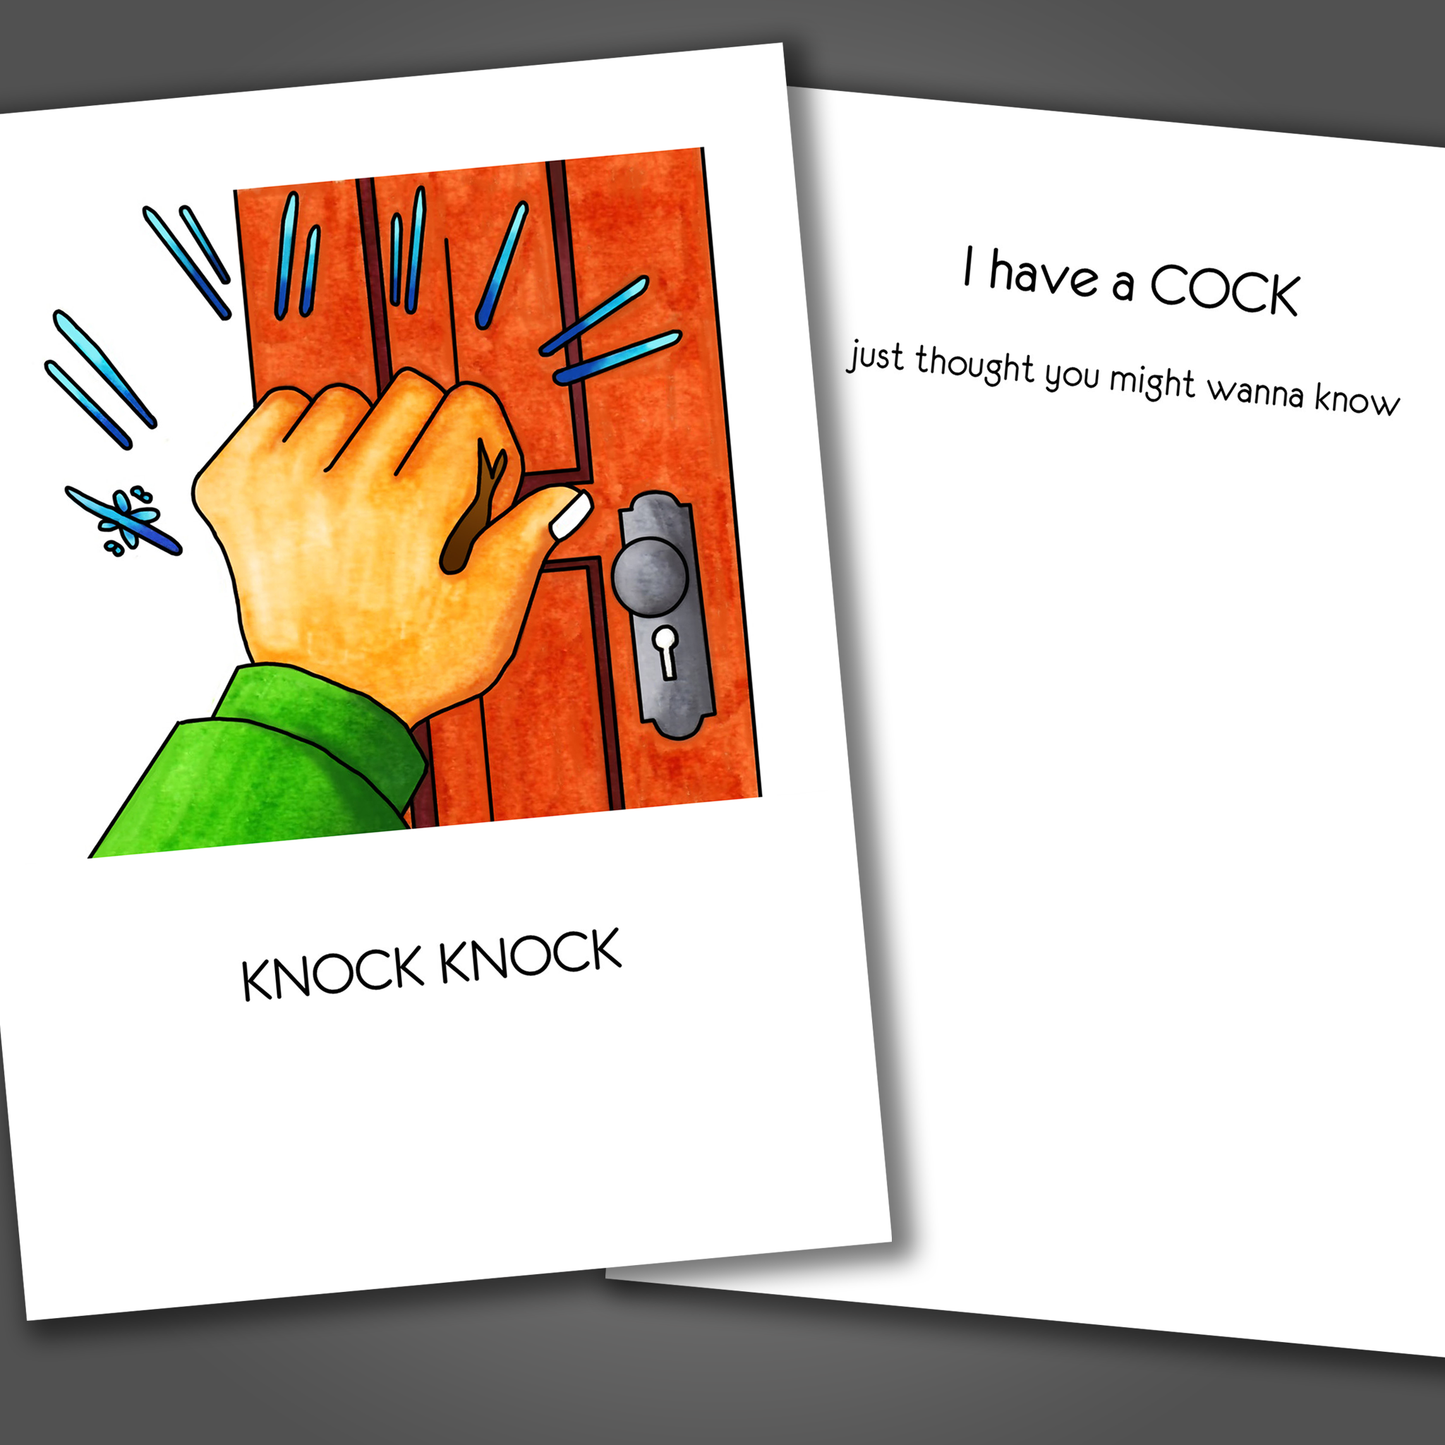 Funny card with a drawing of a hand knocking on a door on the front of the card. Inside the card is a funny joke that says I have a cock.